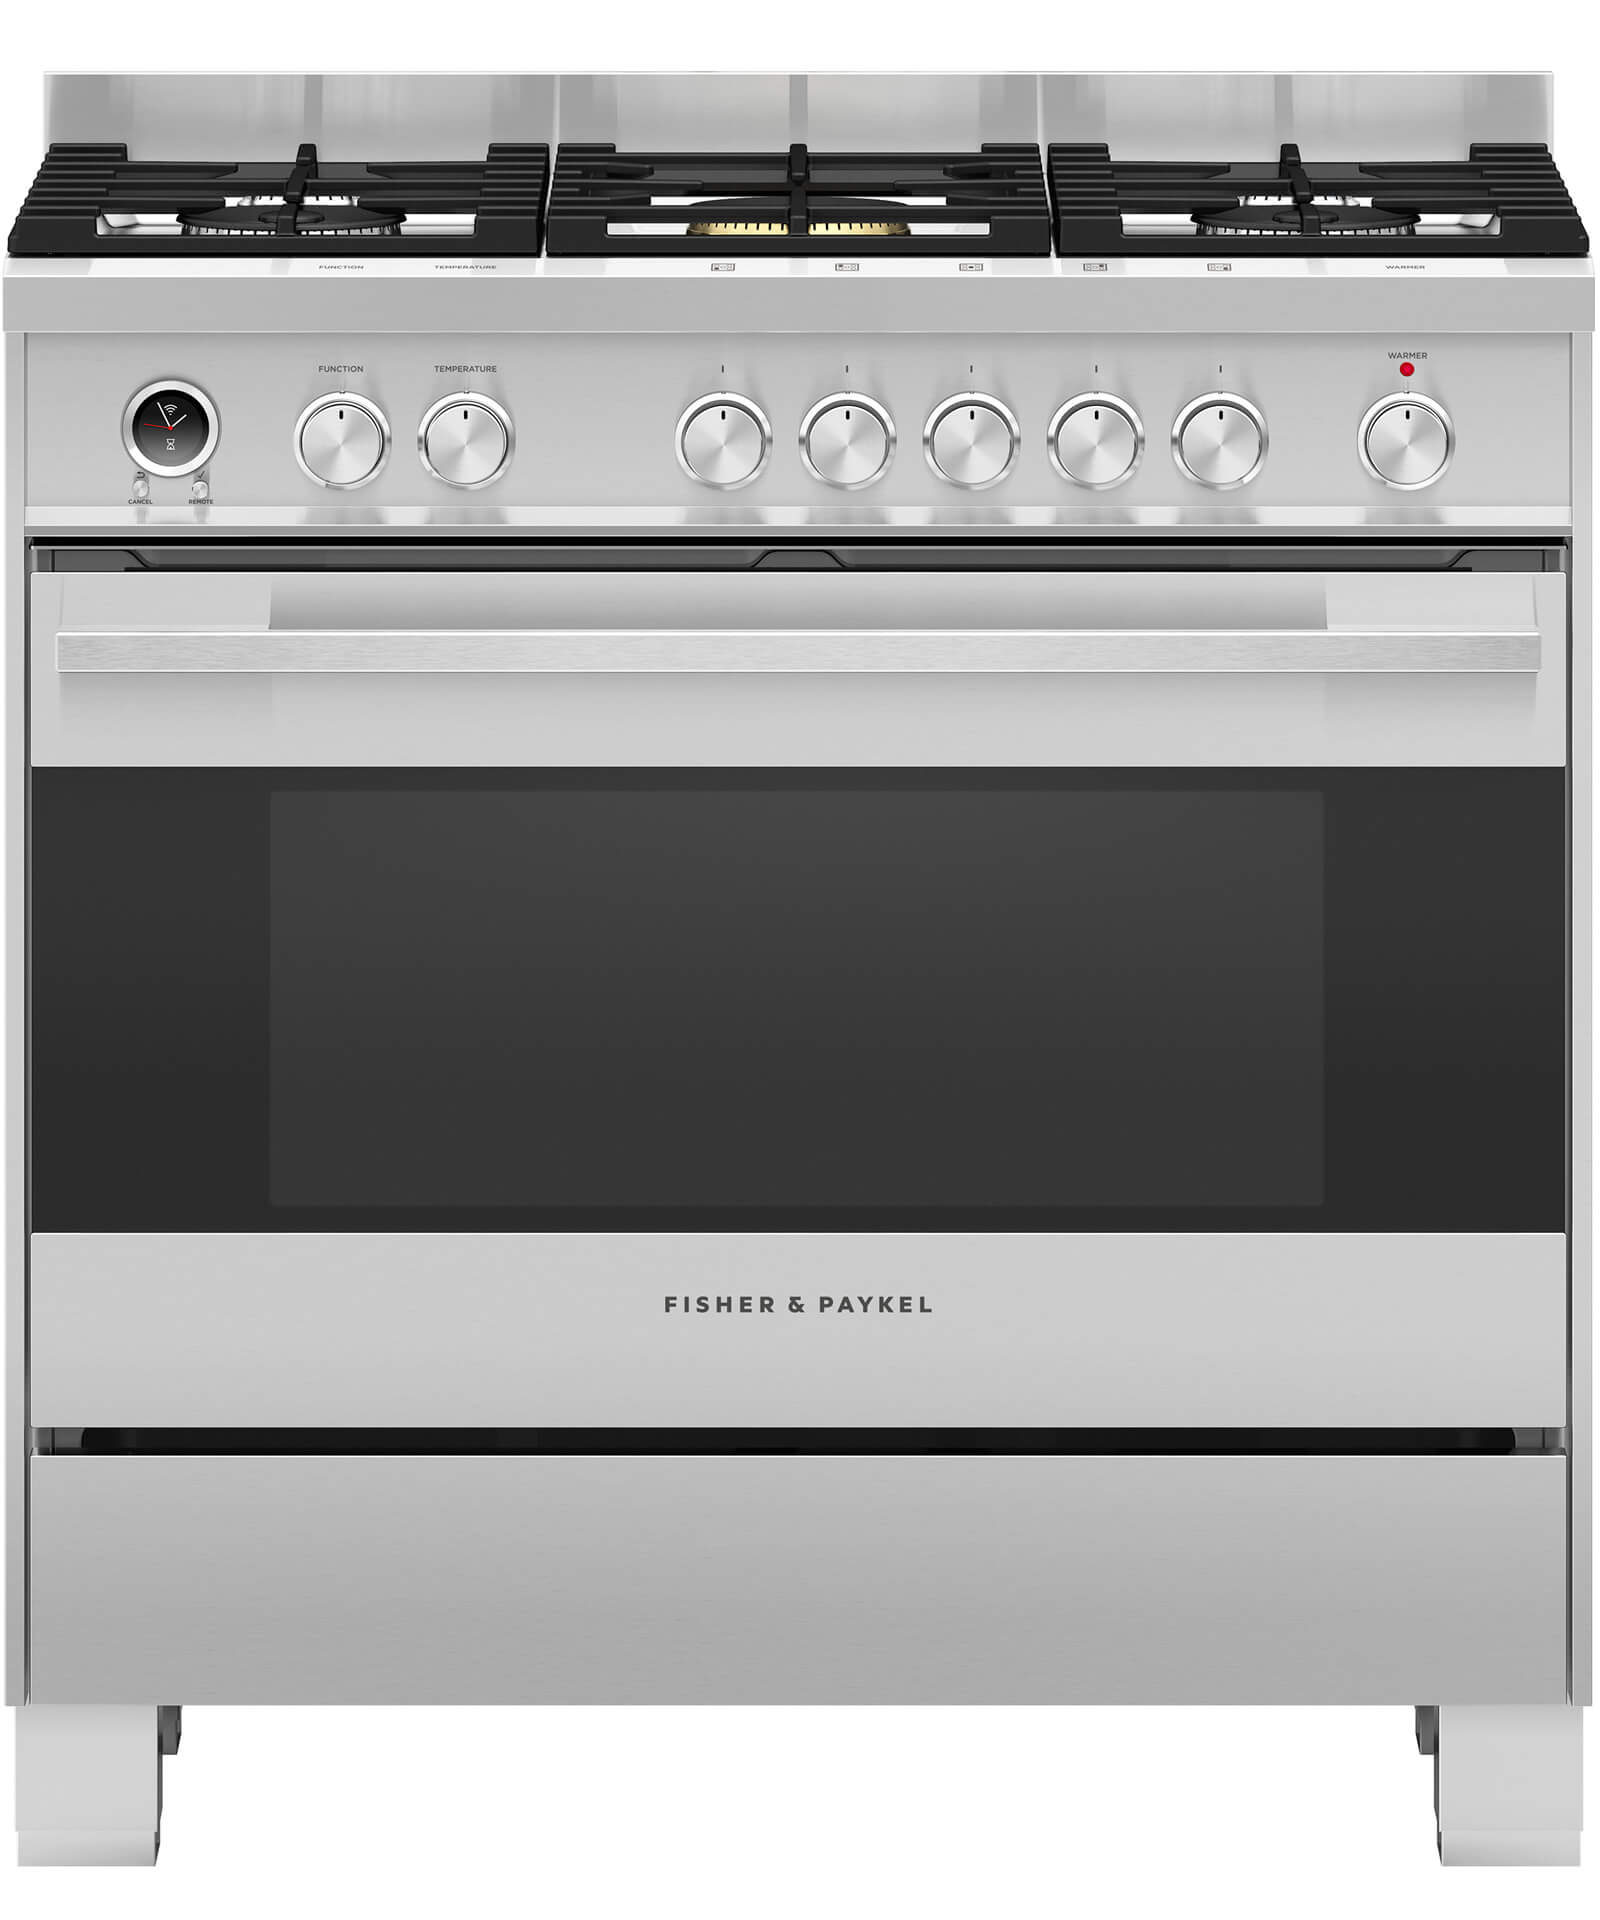 dual fuel cooker installation